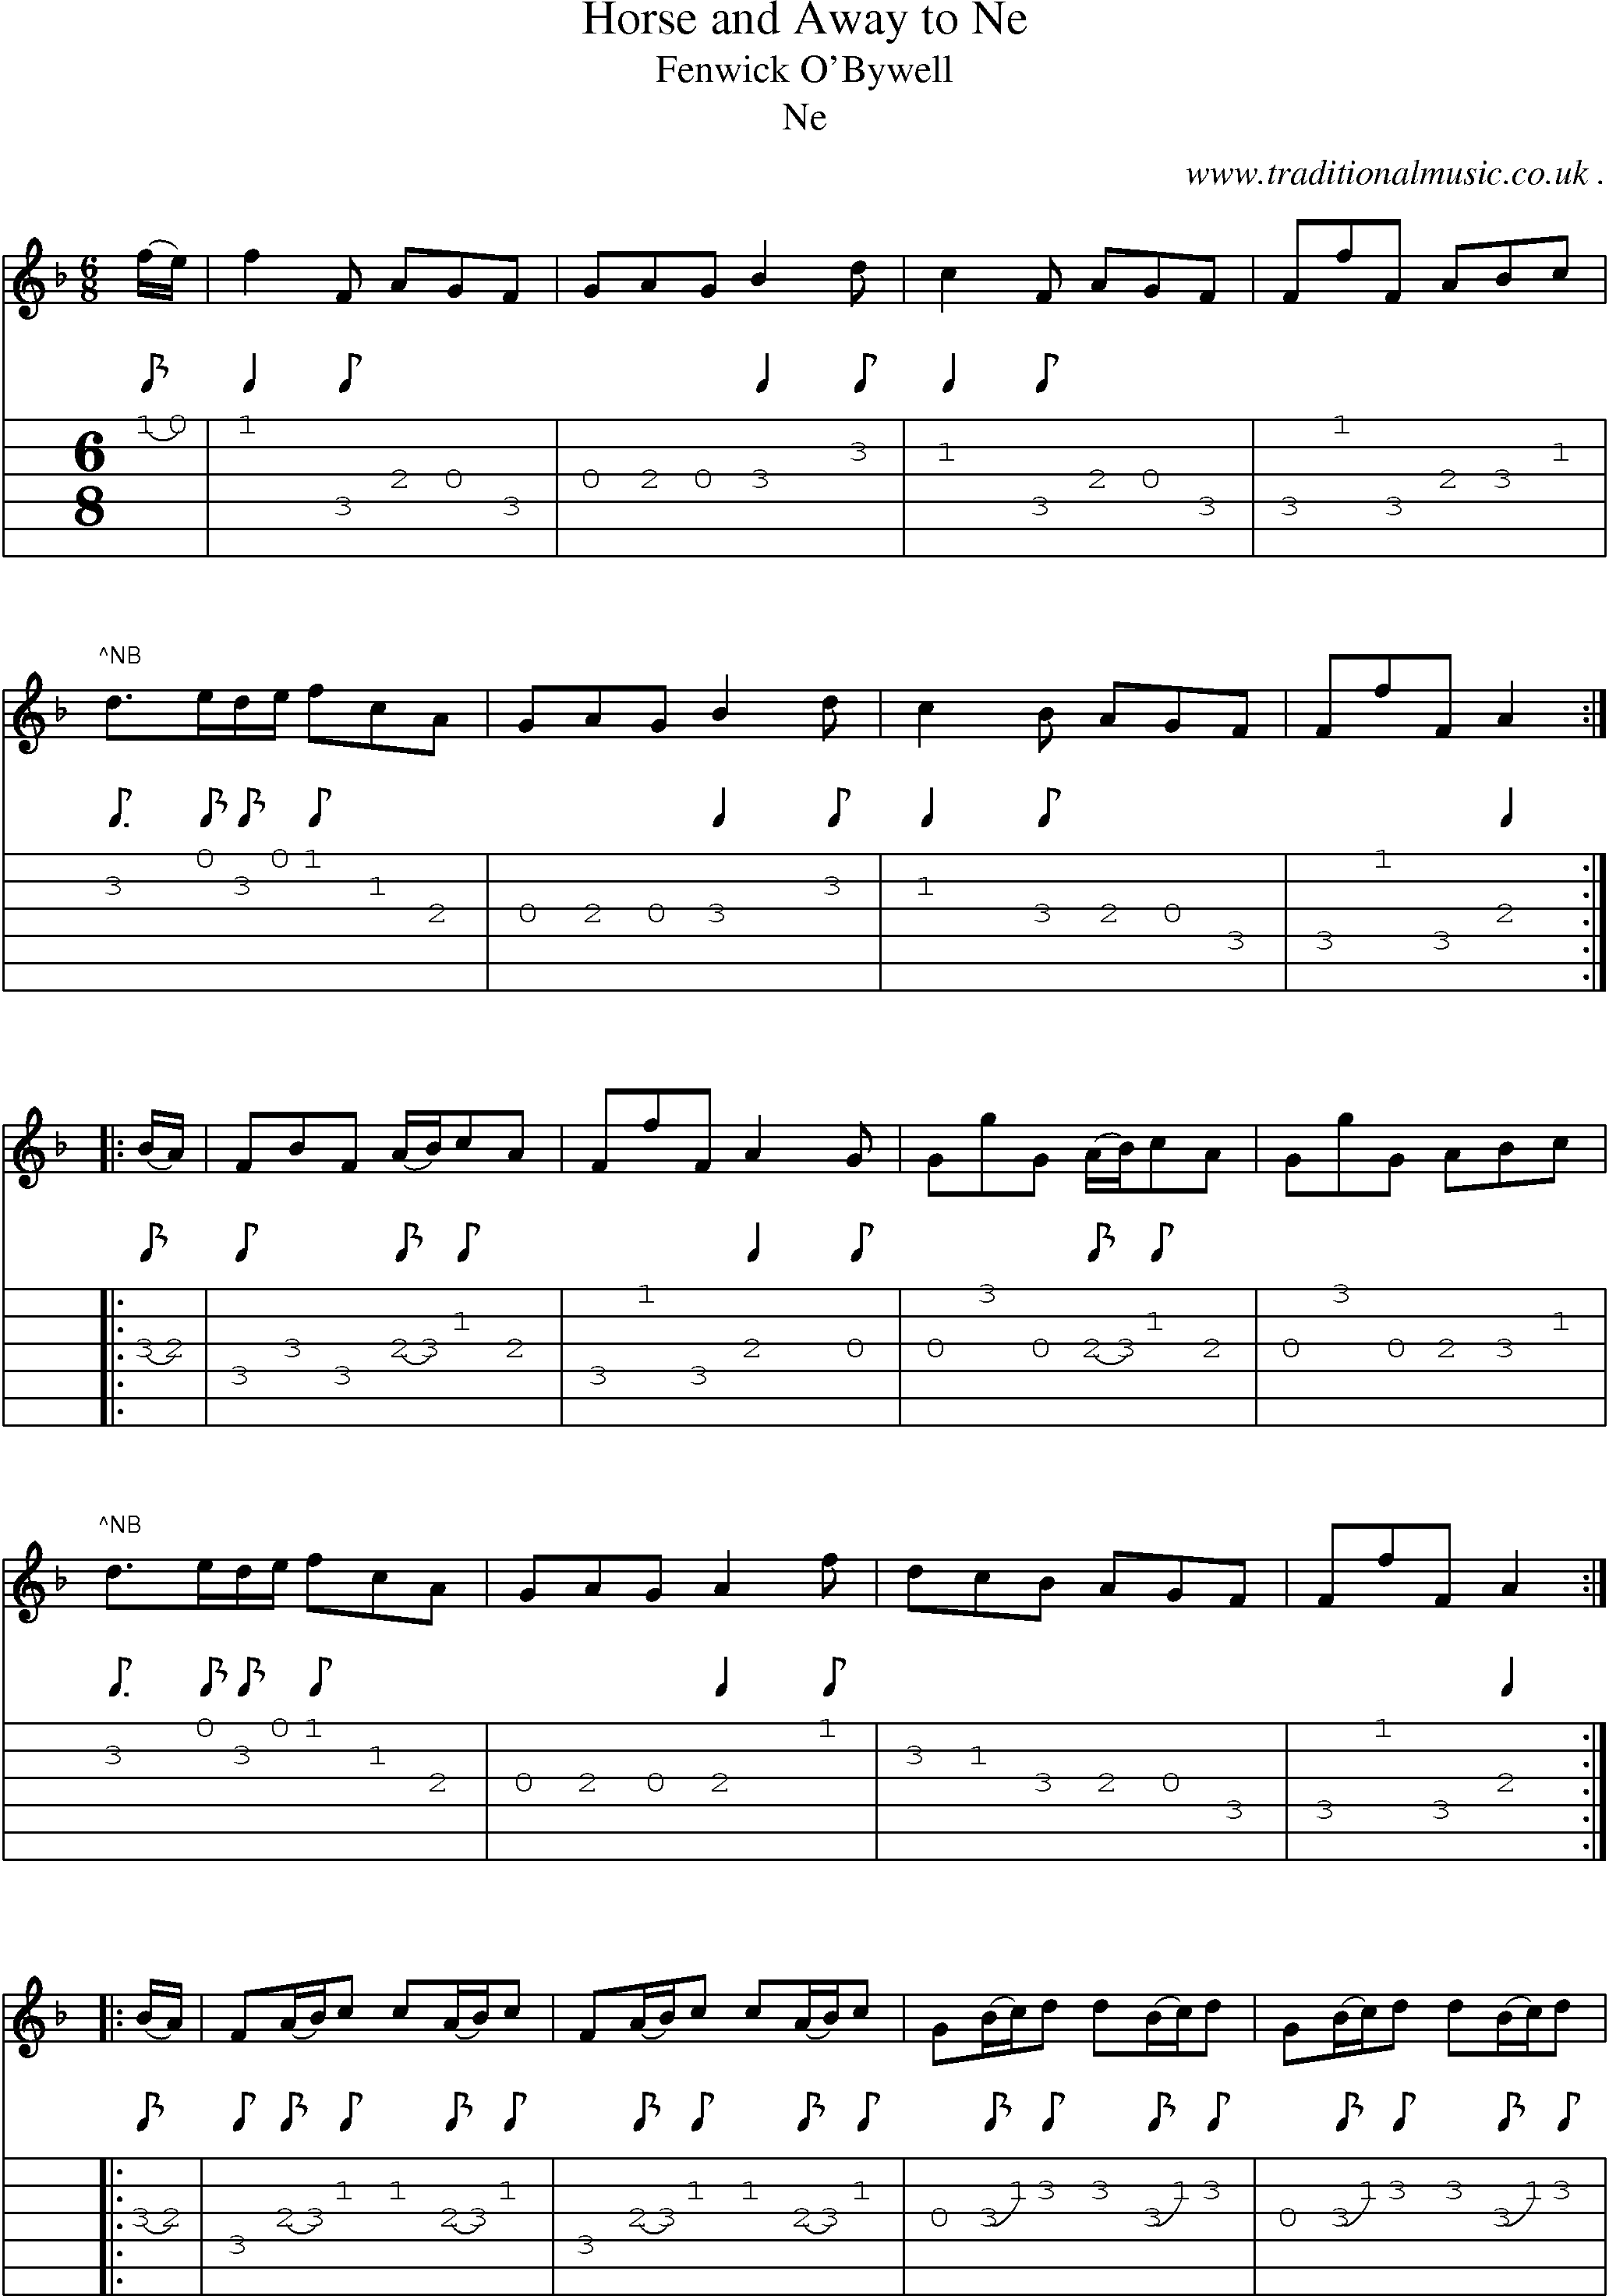 Sheet-Music and Guitar Tabs for Horse And Away To Ne